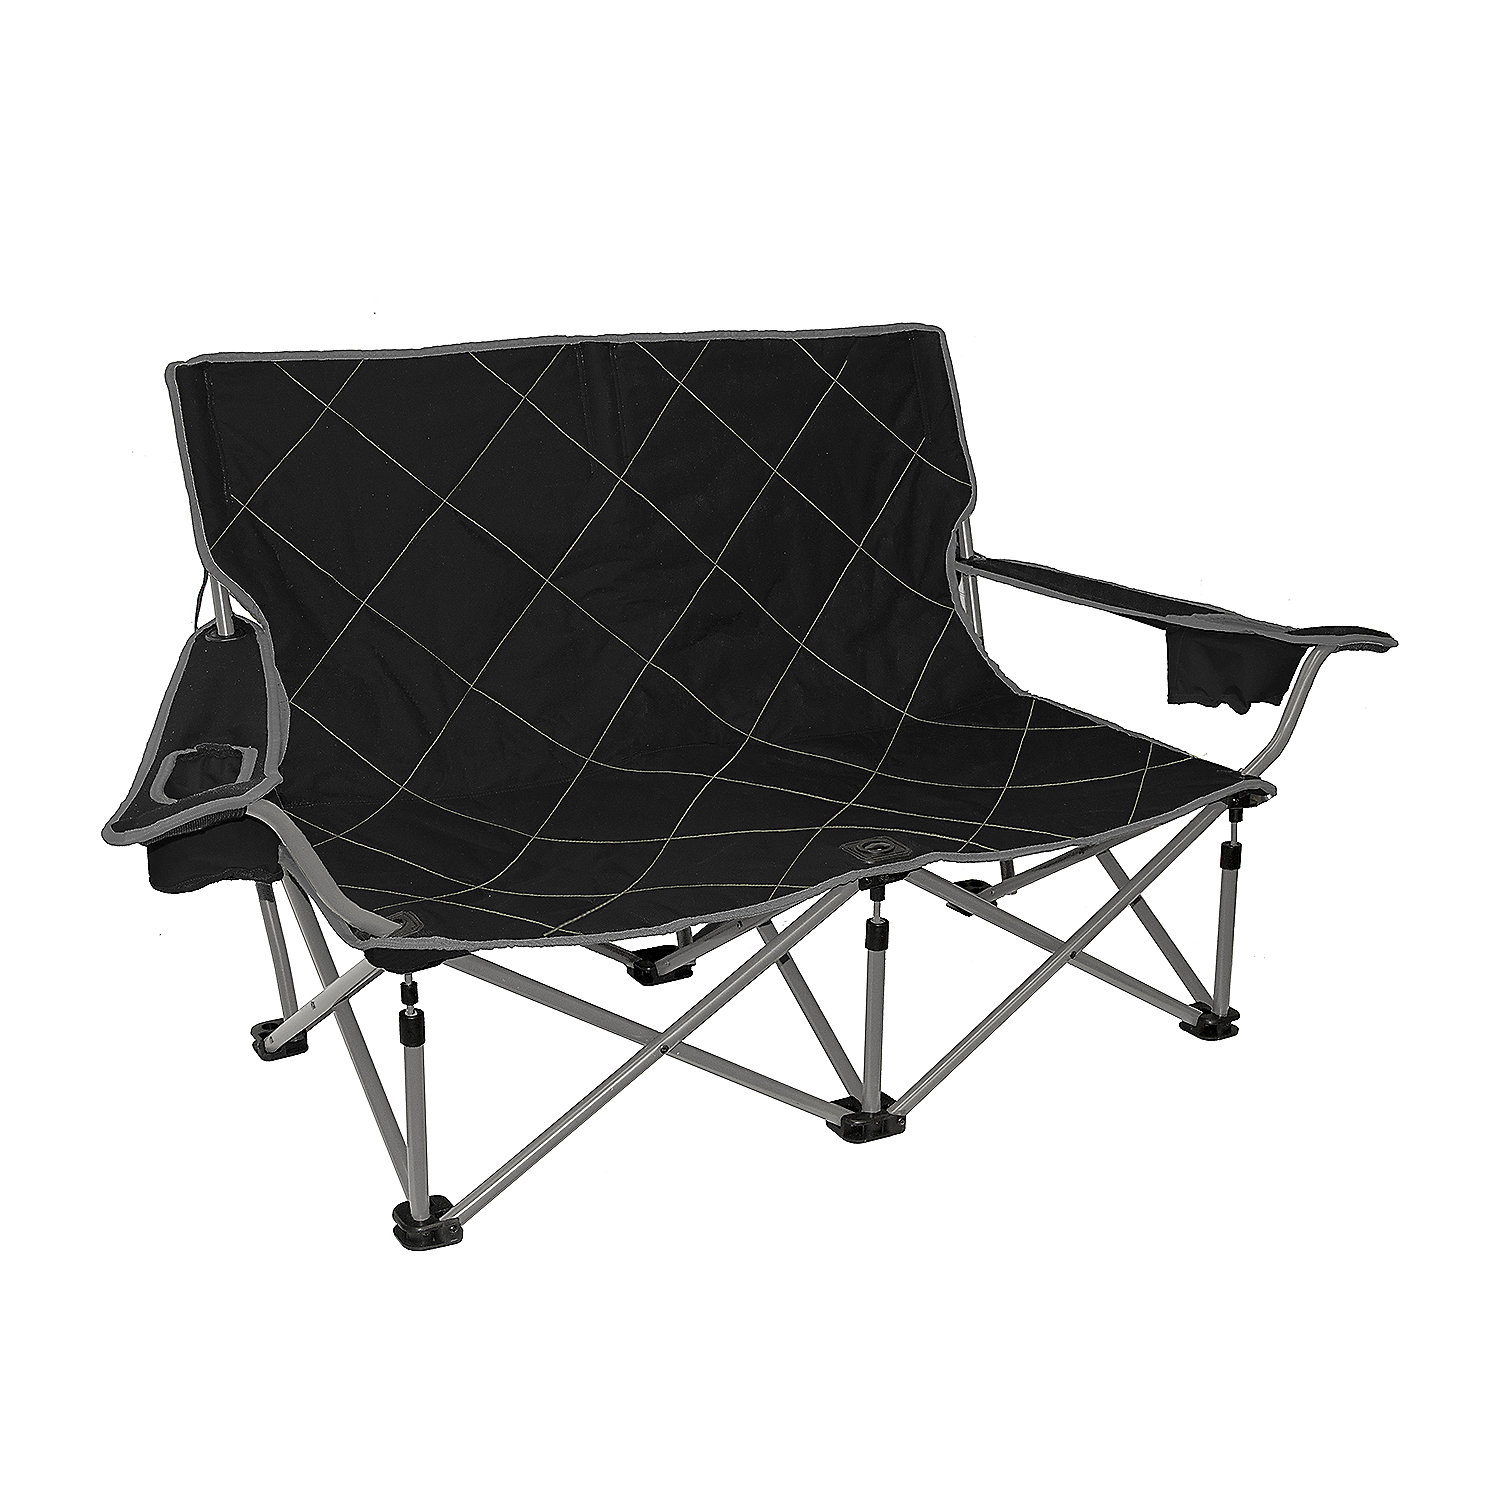 Travel Chair Shorty Camp Couch